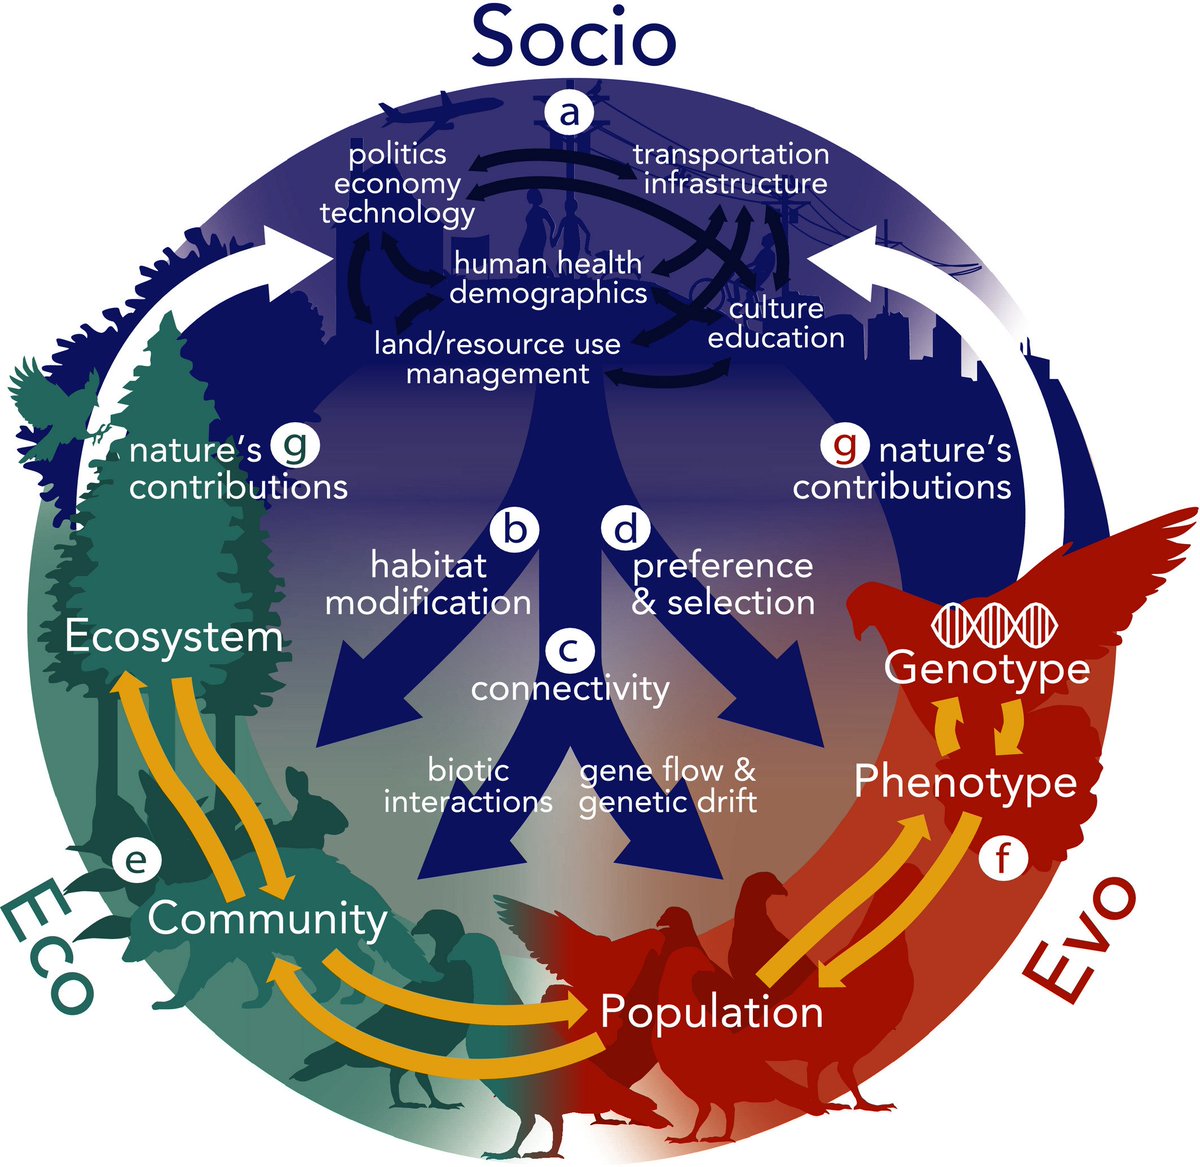 Finally, a must-read of the special issue is the capstone by Des Roches et al  @DrSimoneDr  https://doi.org/10.1111/eva.13065 which proposes a “socio-eco-evolutionary” framework for studying urban ecosystems. 14/14